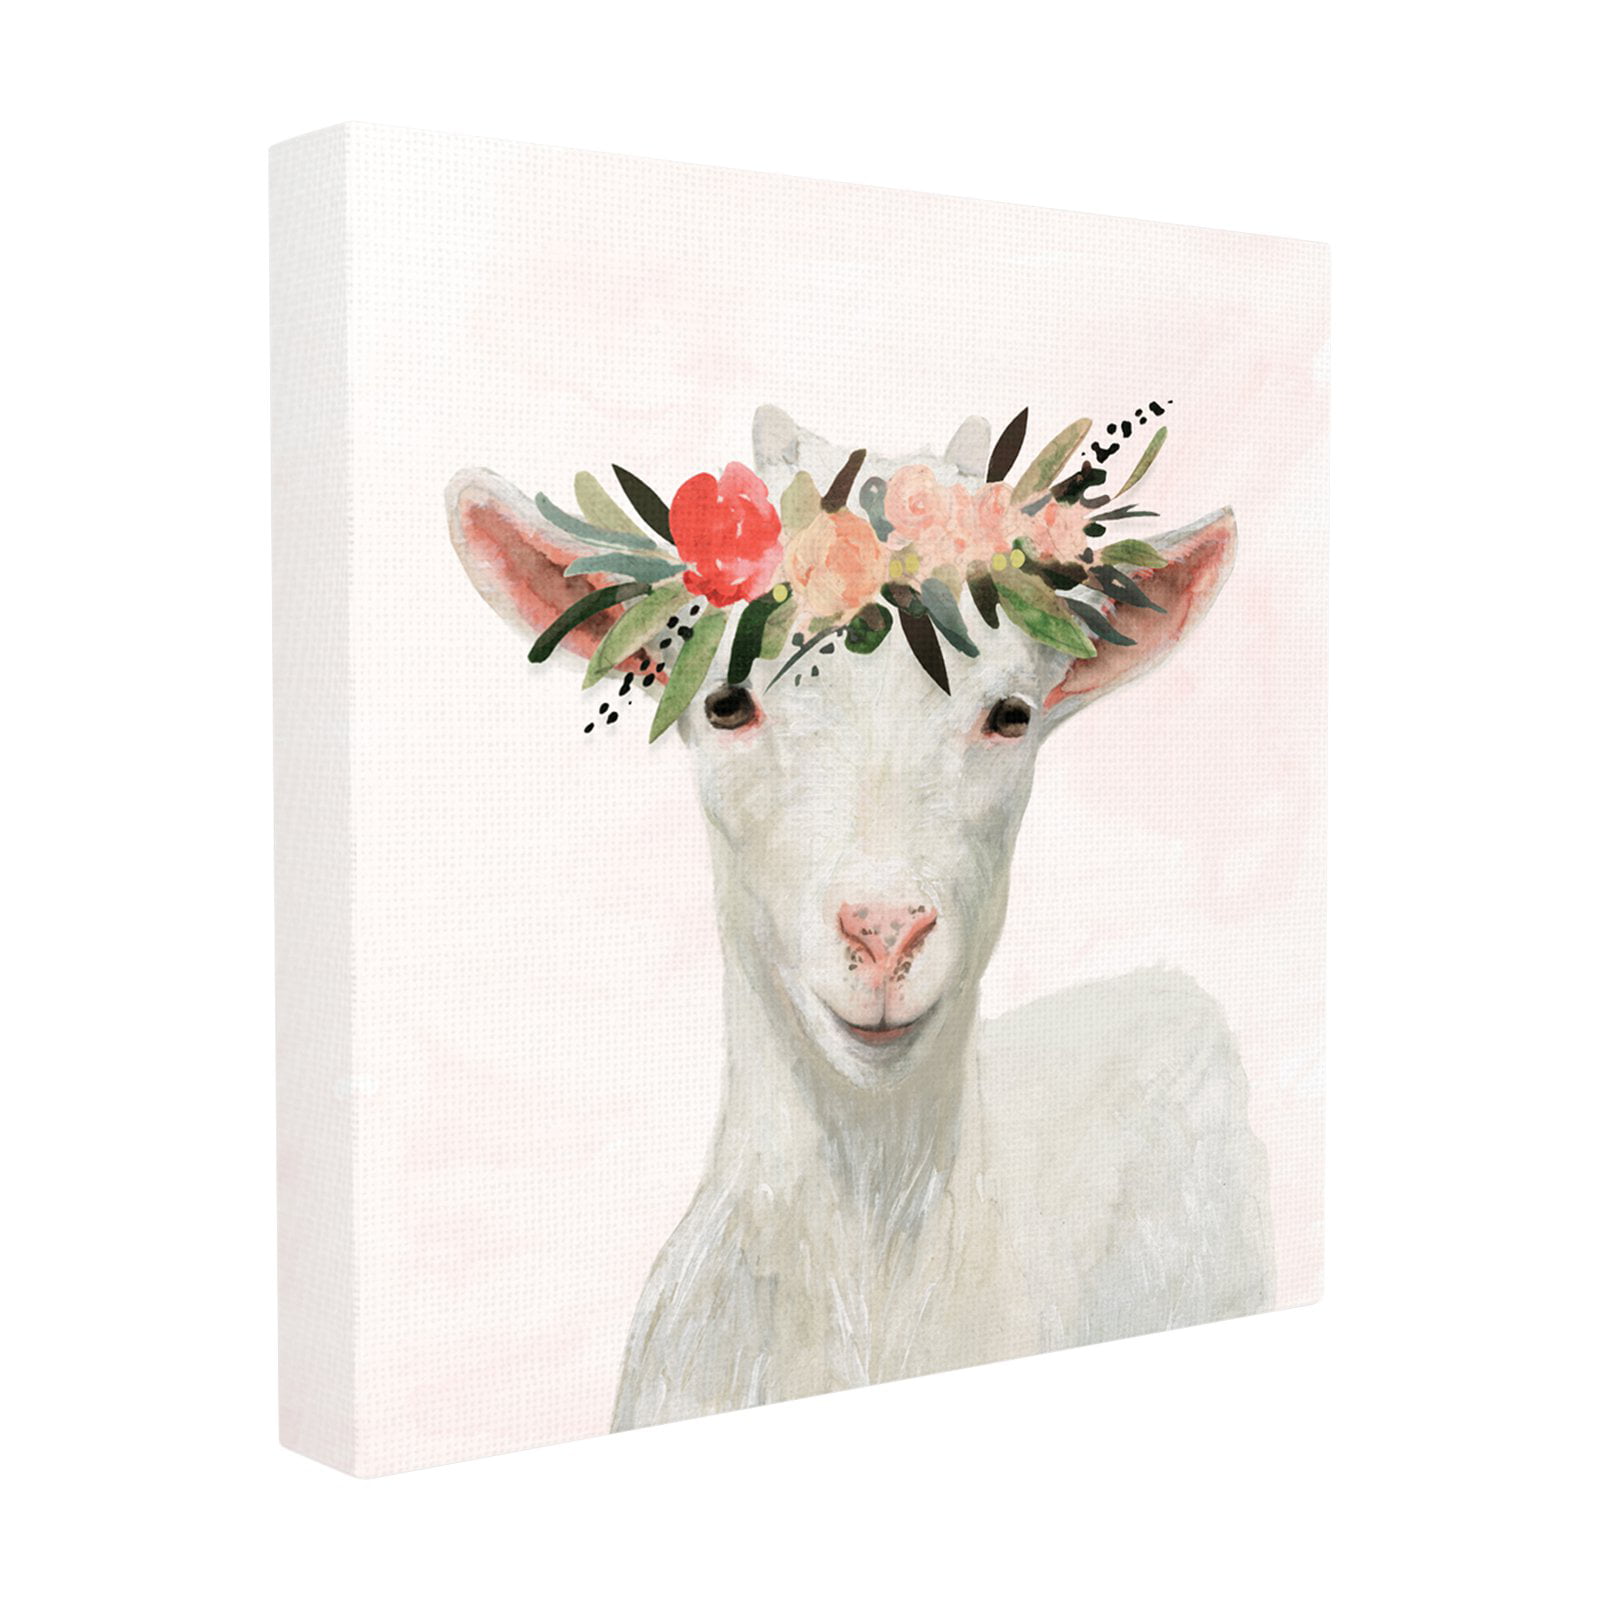 The Stupell Home Decor Collection Springtime Flower Crown Baby Goat Wall  Plaque Art, 12 x 0.5 x 12 - Walmart.com